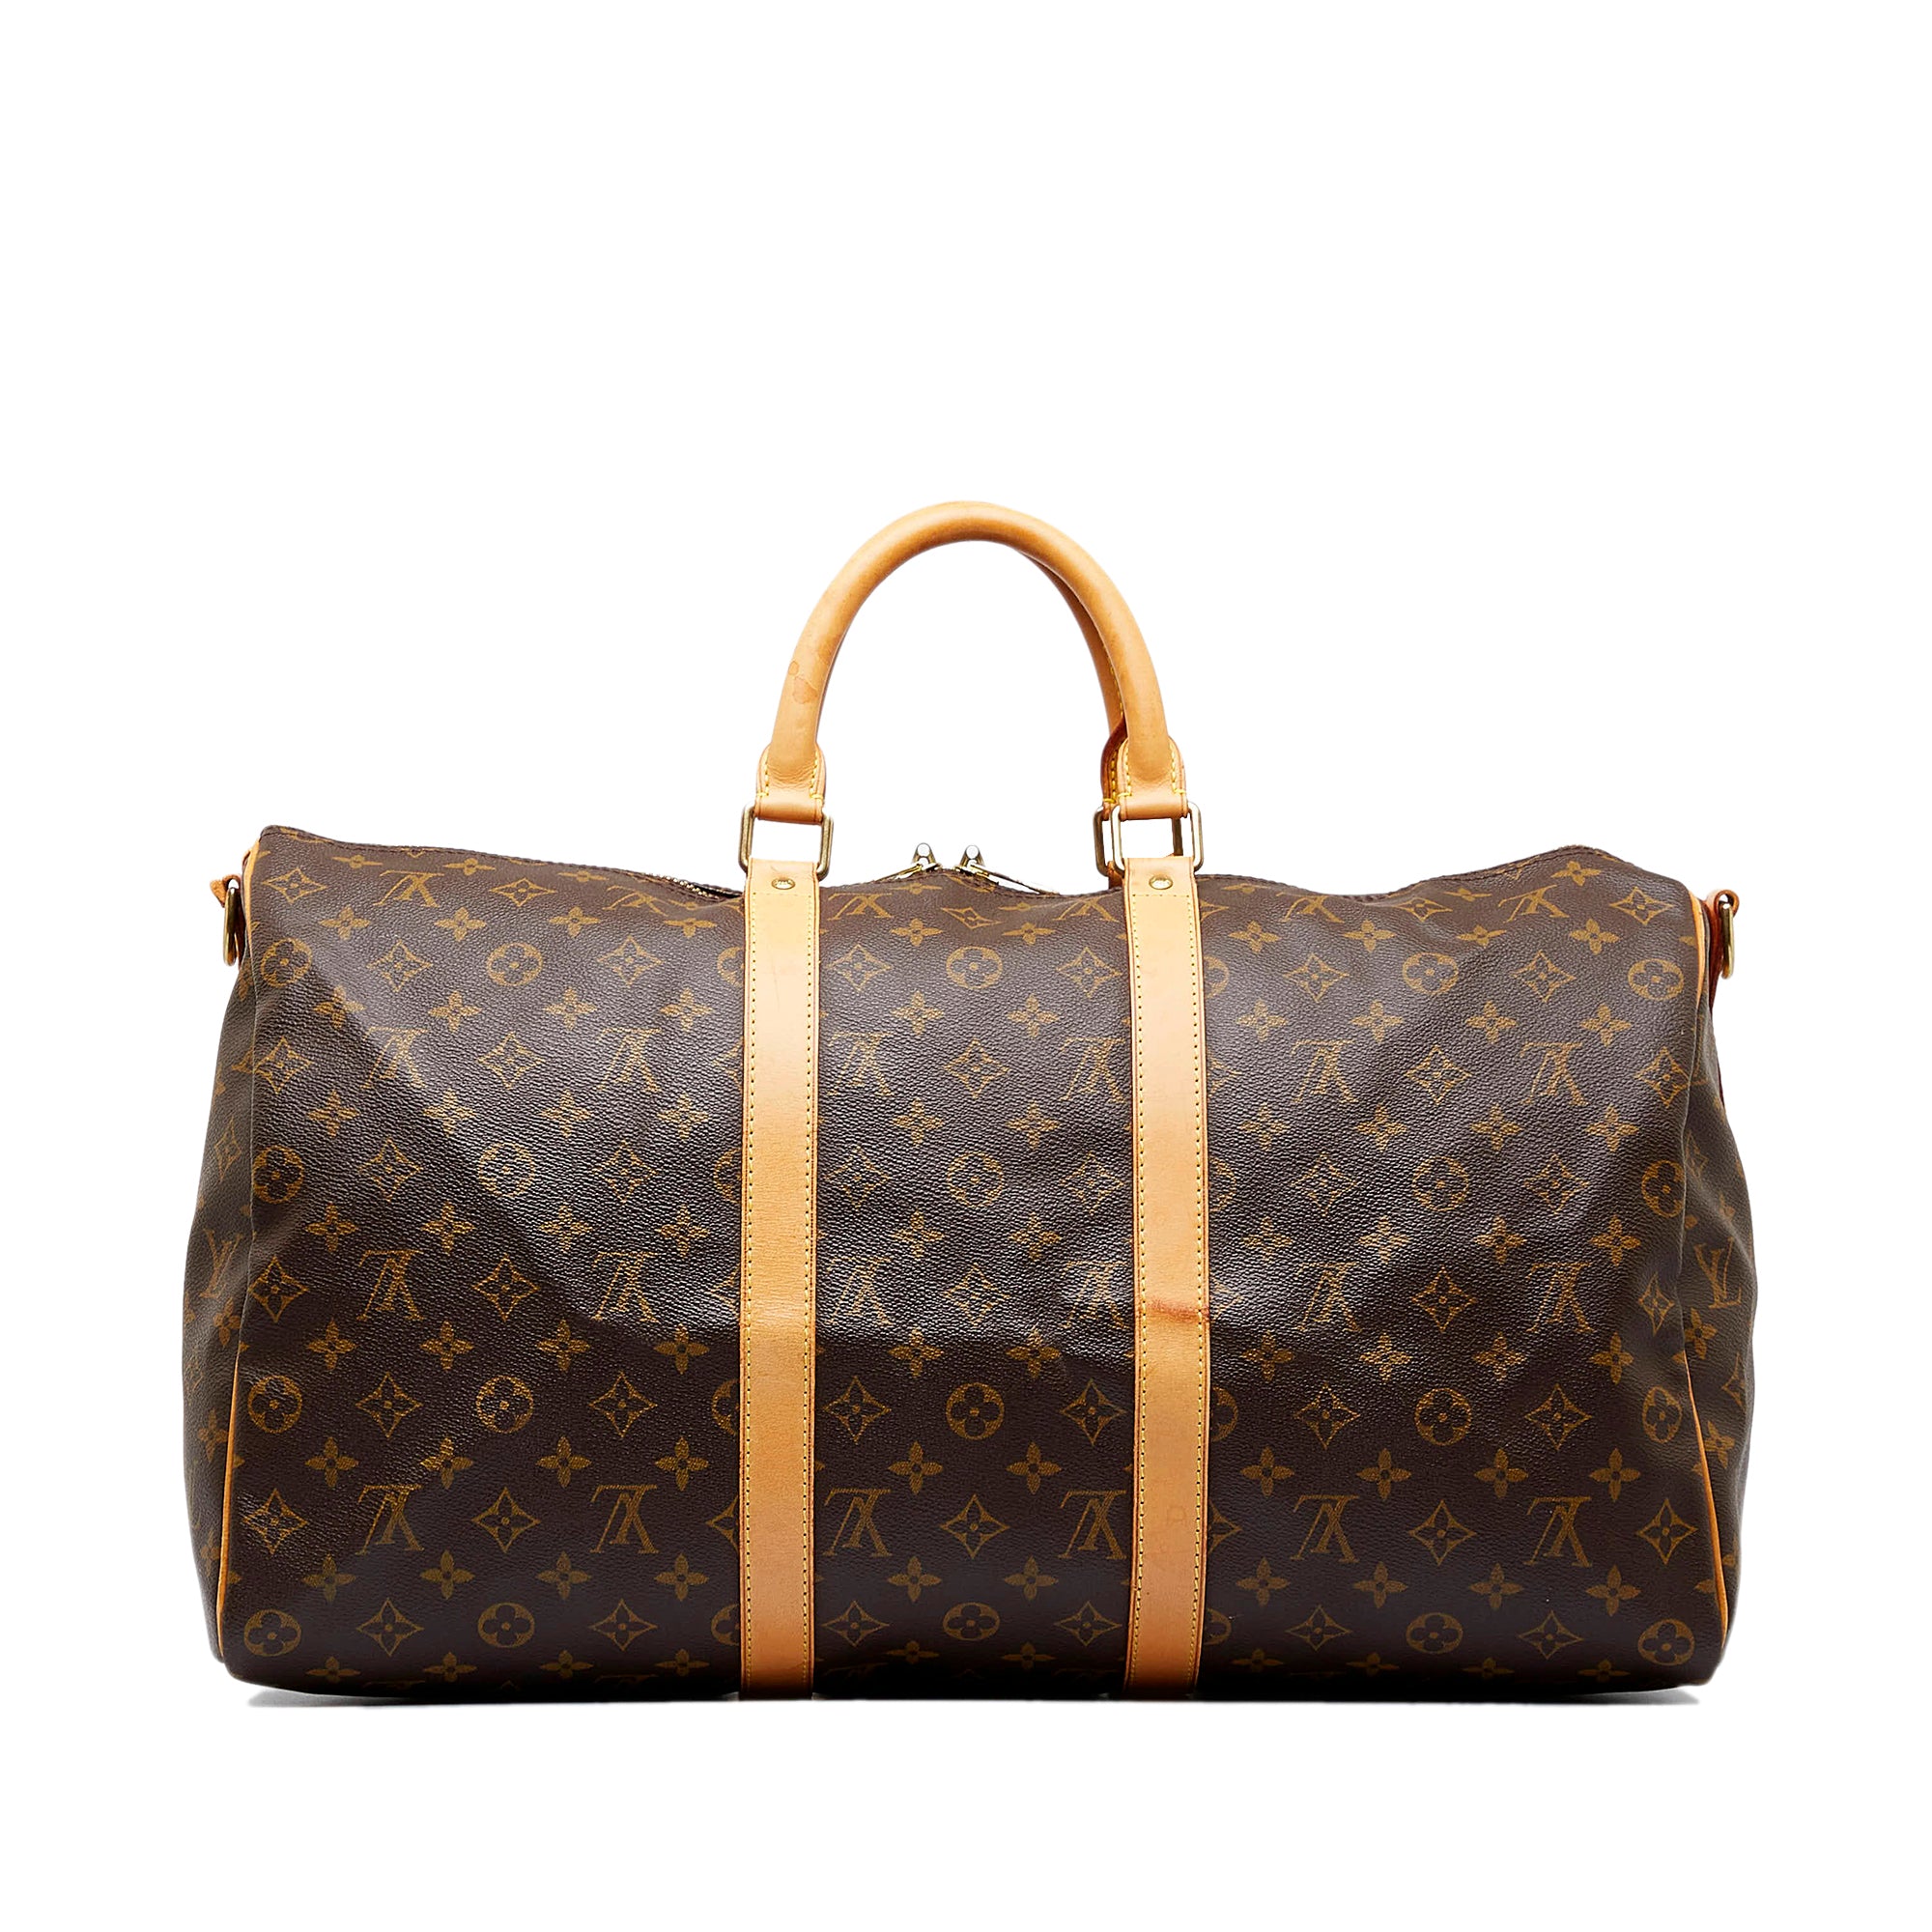 LOUIS VUITTON MONOGRAM KEEPALL 50 BANDOULIERE DUFFLE TRAVEL BAG - clothing  & accessories - by owner - apparel sale 